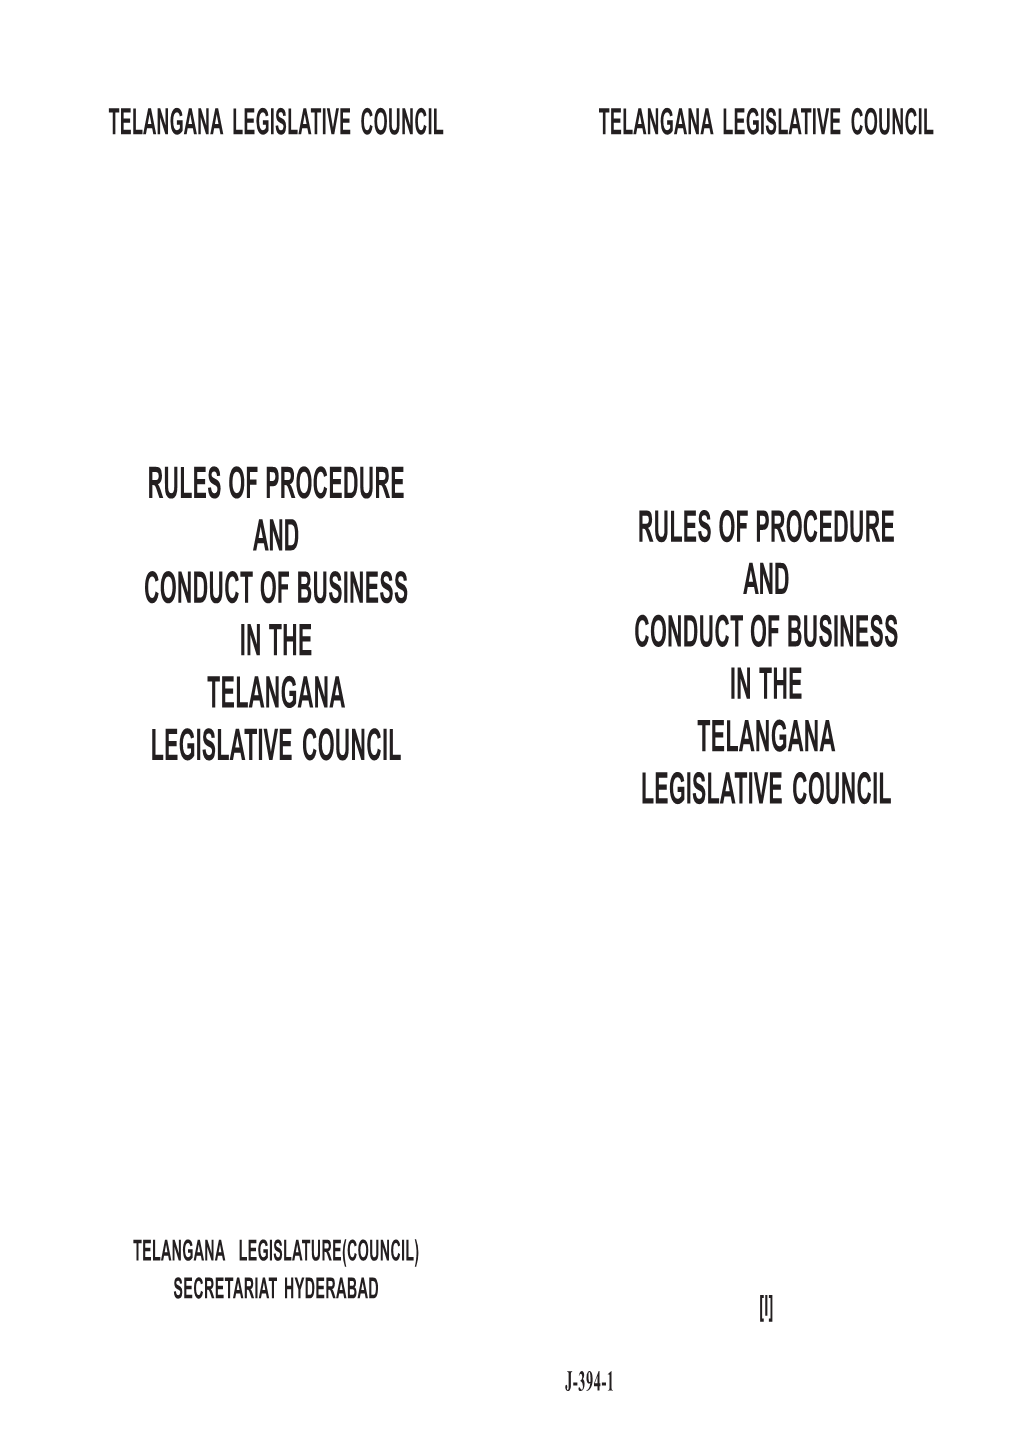 Rules of Procedure and Conduct